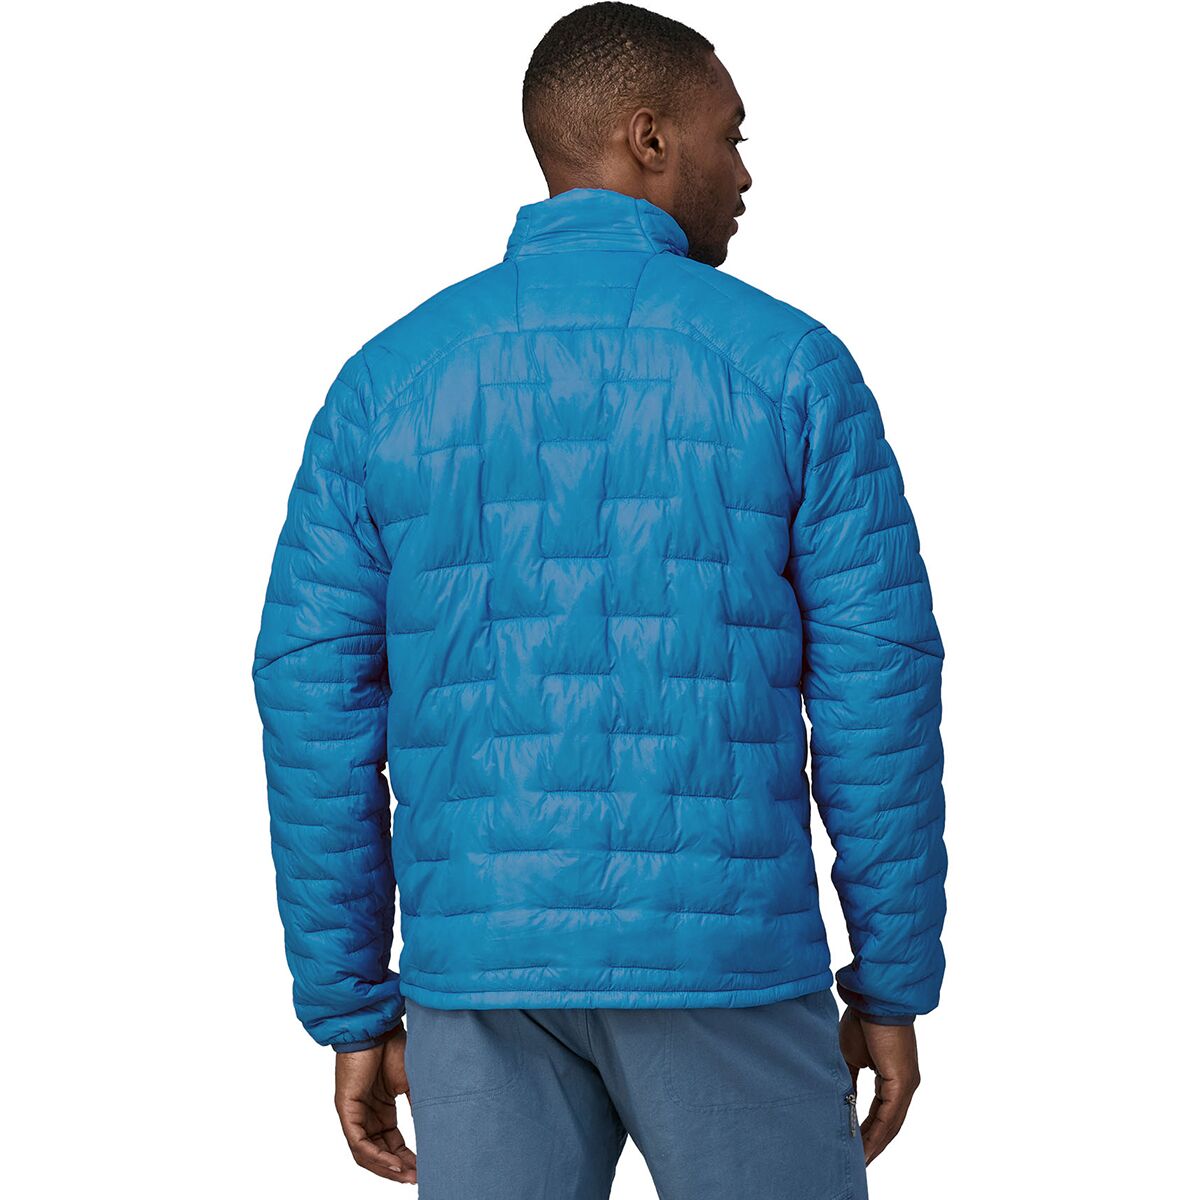 Patagonia Micro Puff Insulated Jacket - Men's - Clothing